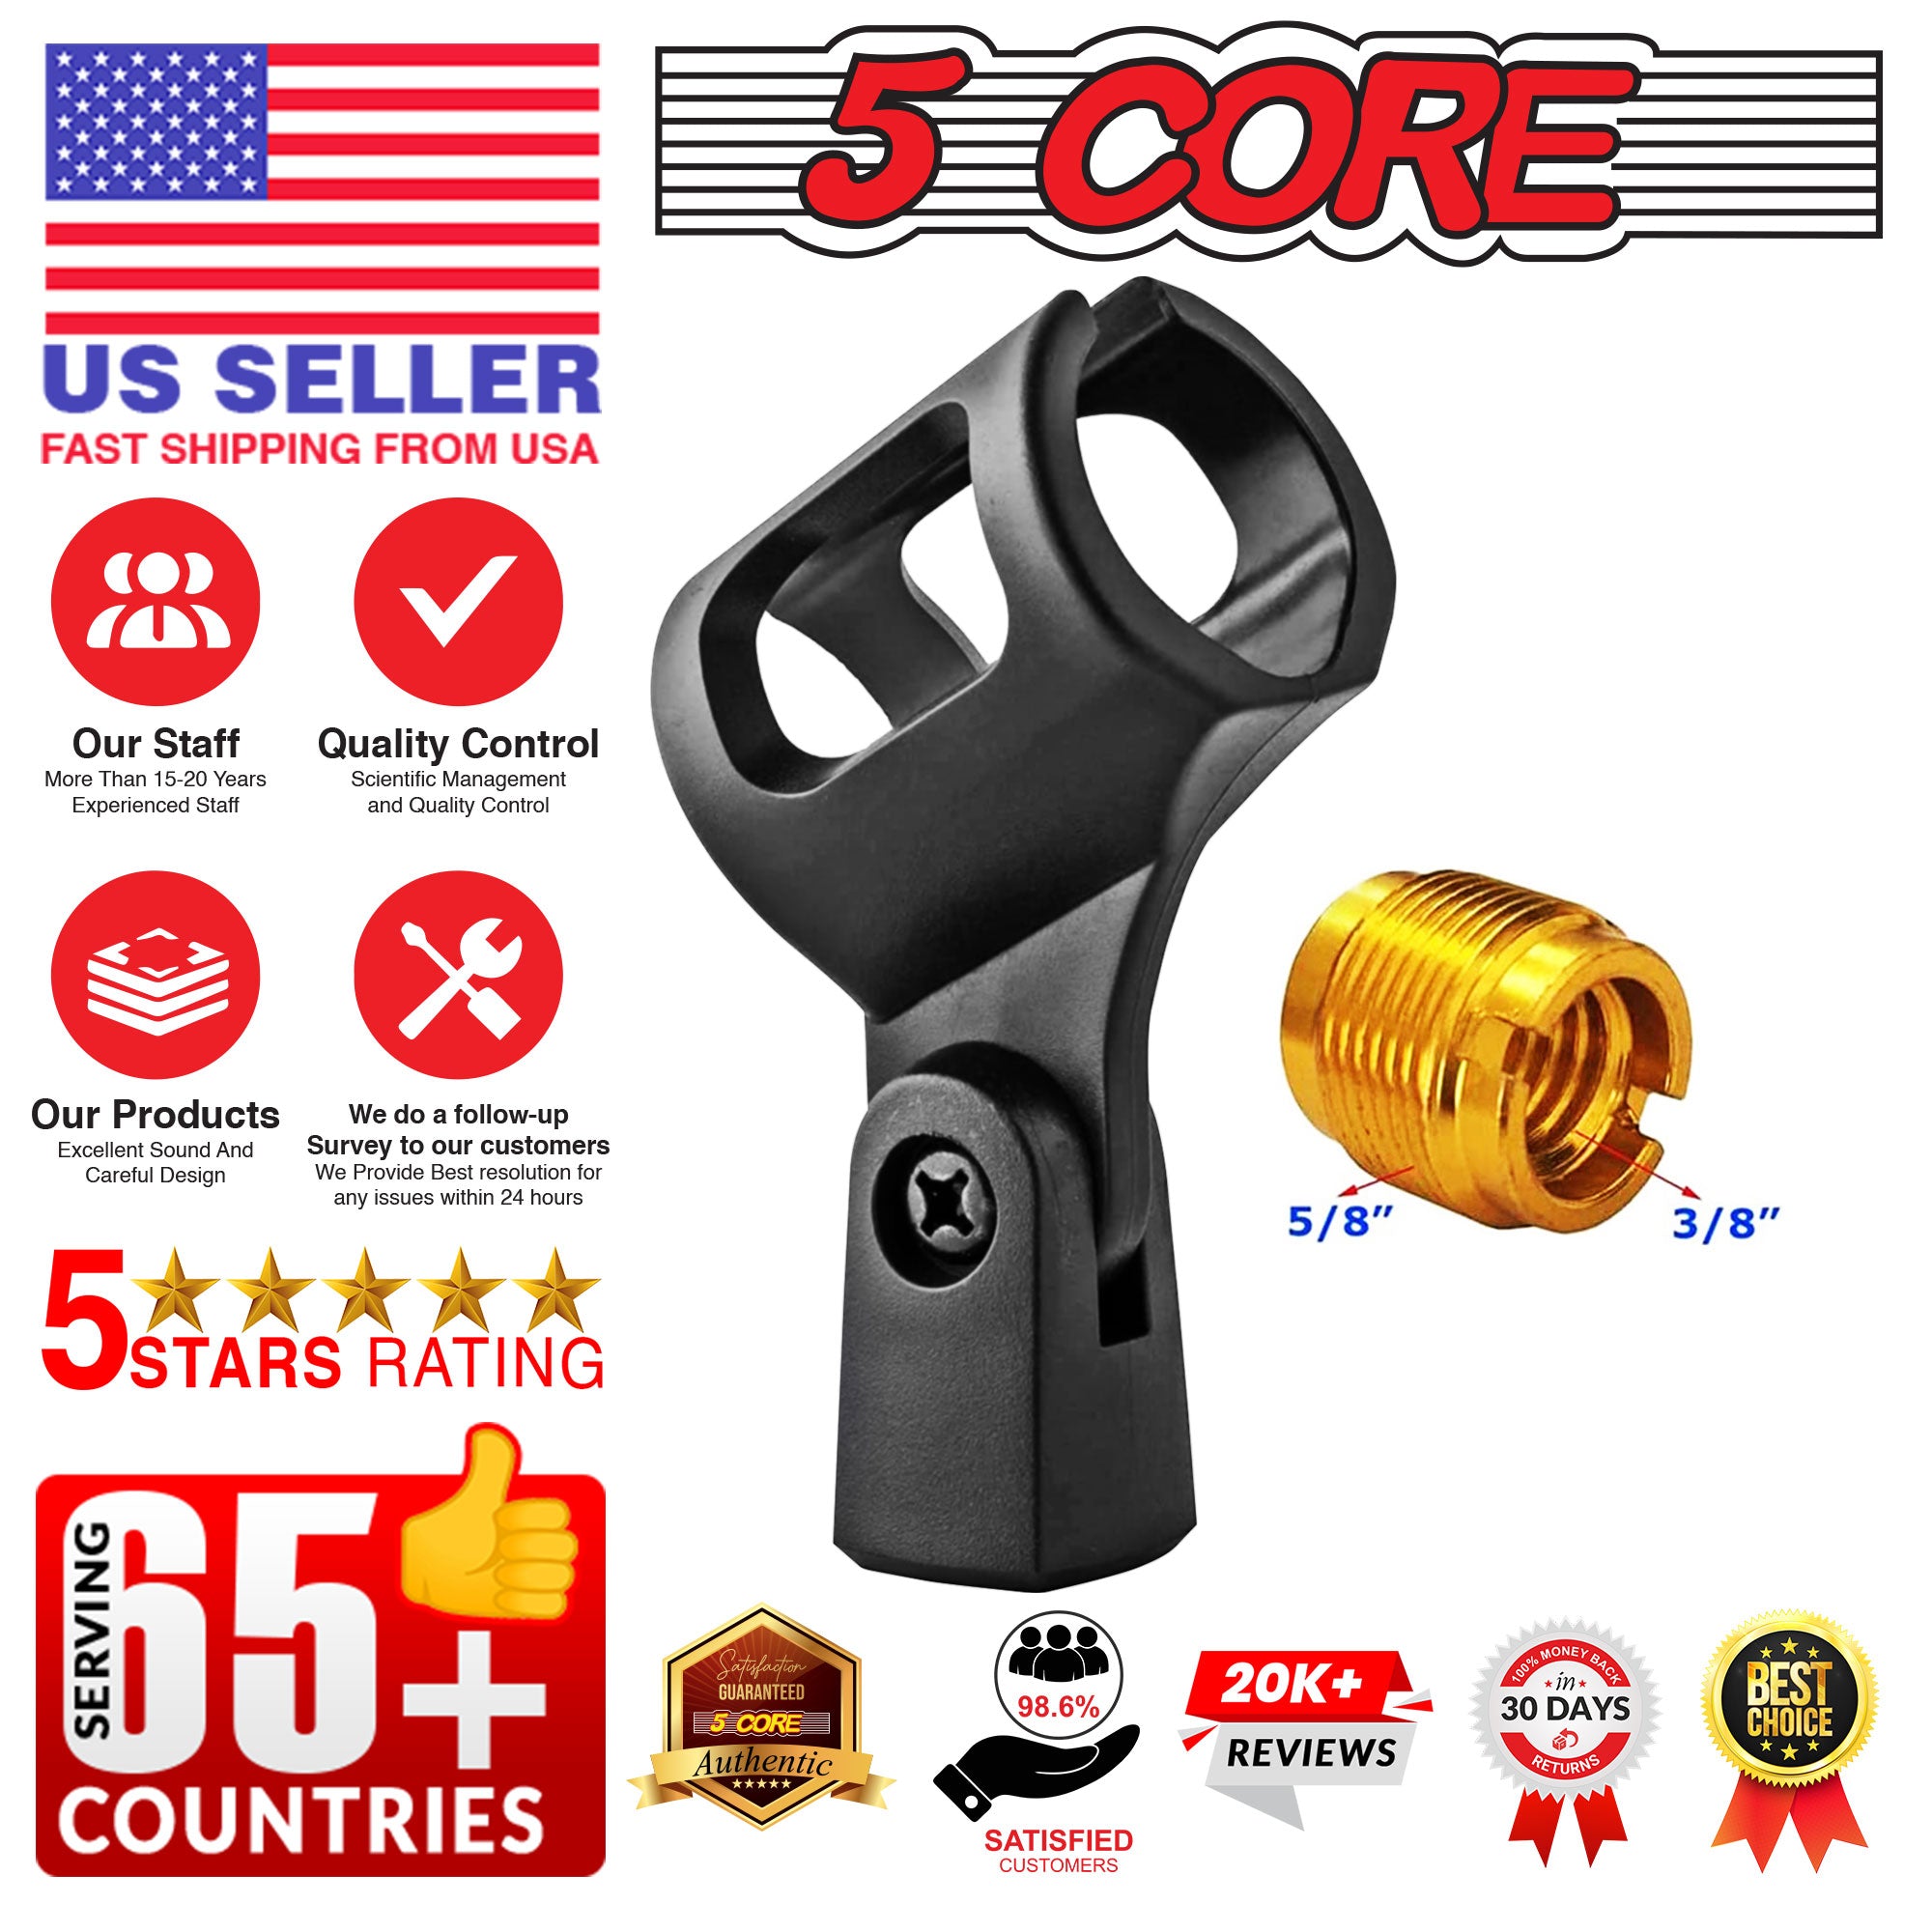 5 Core Microphone Clips Large Barrel Style Mic Holder Adjustable Angle for all Handheld Transmitters such as Sm57 Sm58 Sm86 Sm87 - MC-01 2PCS